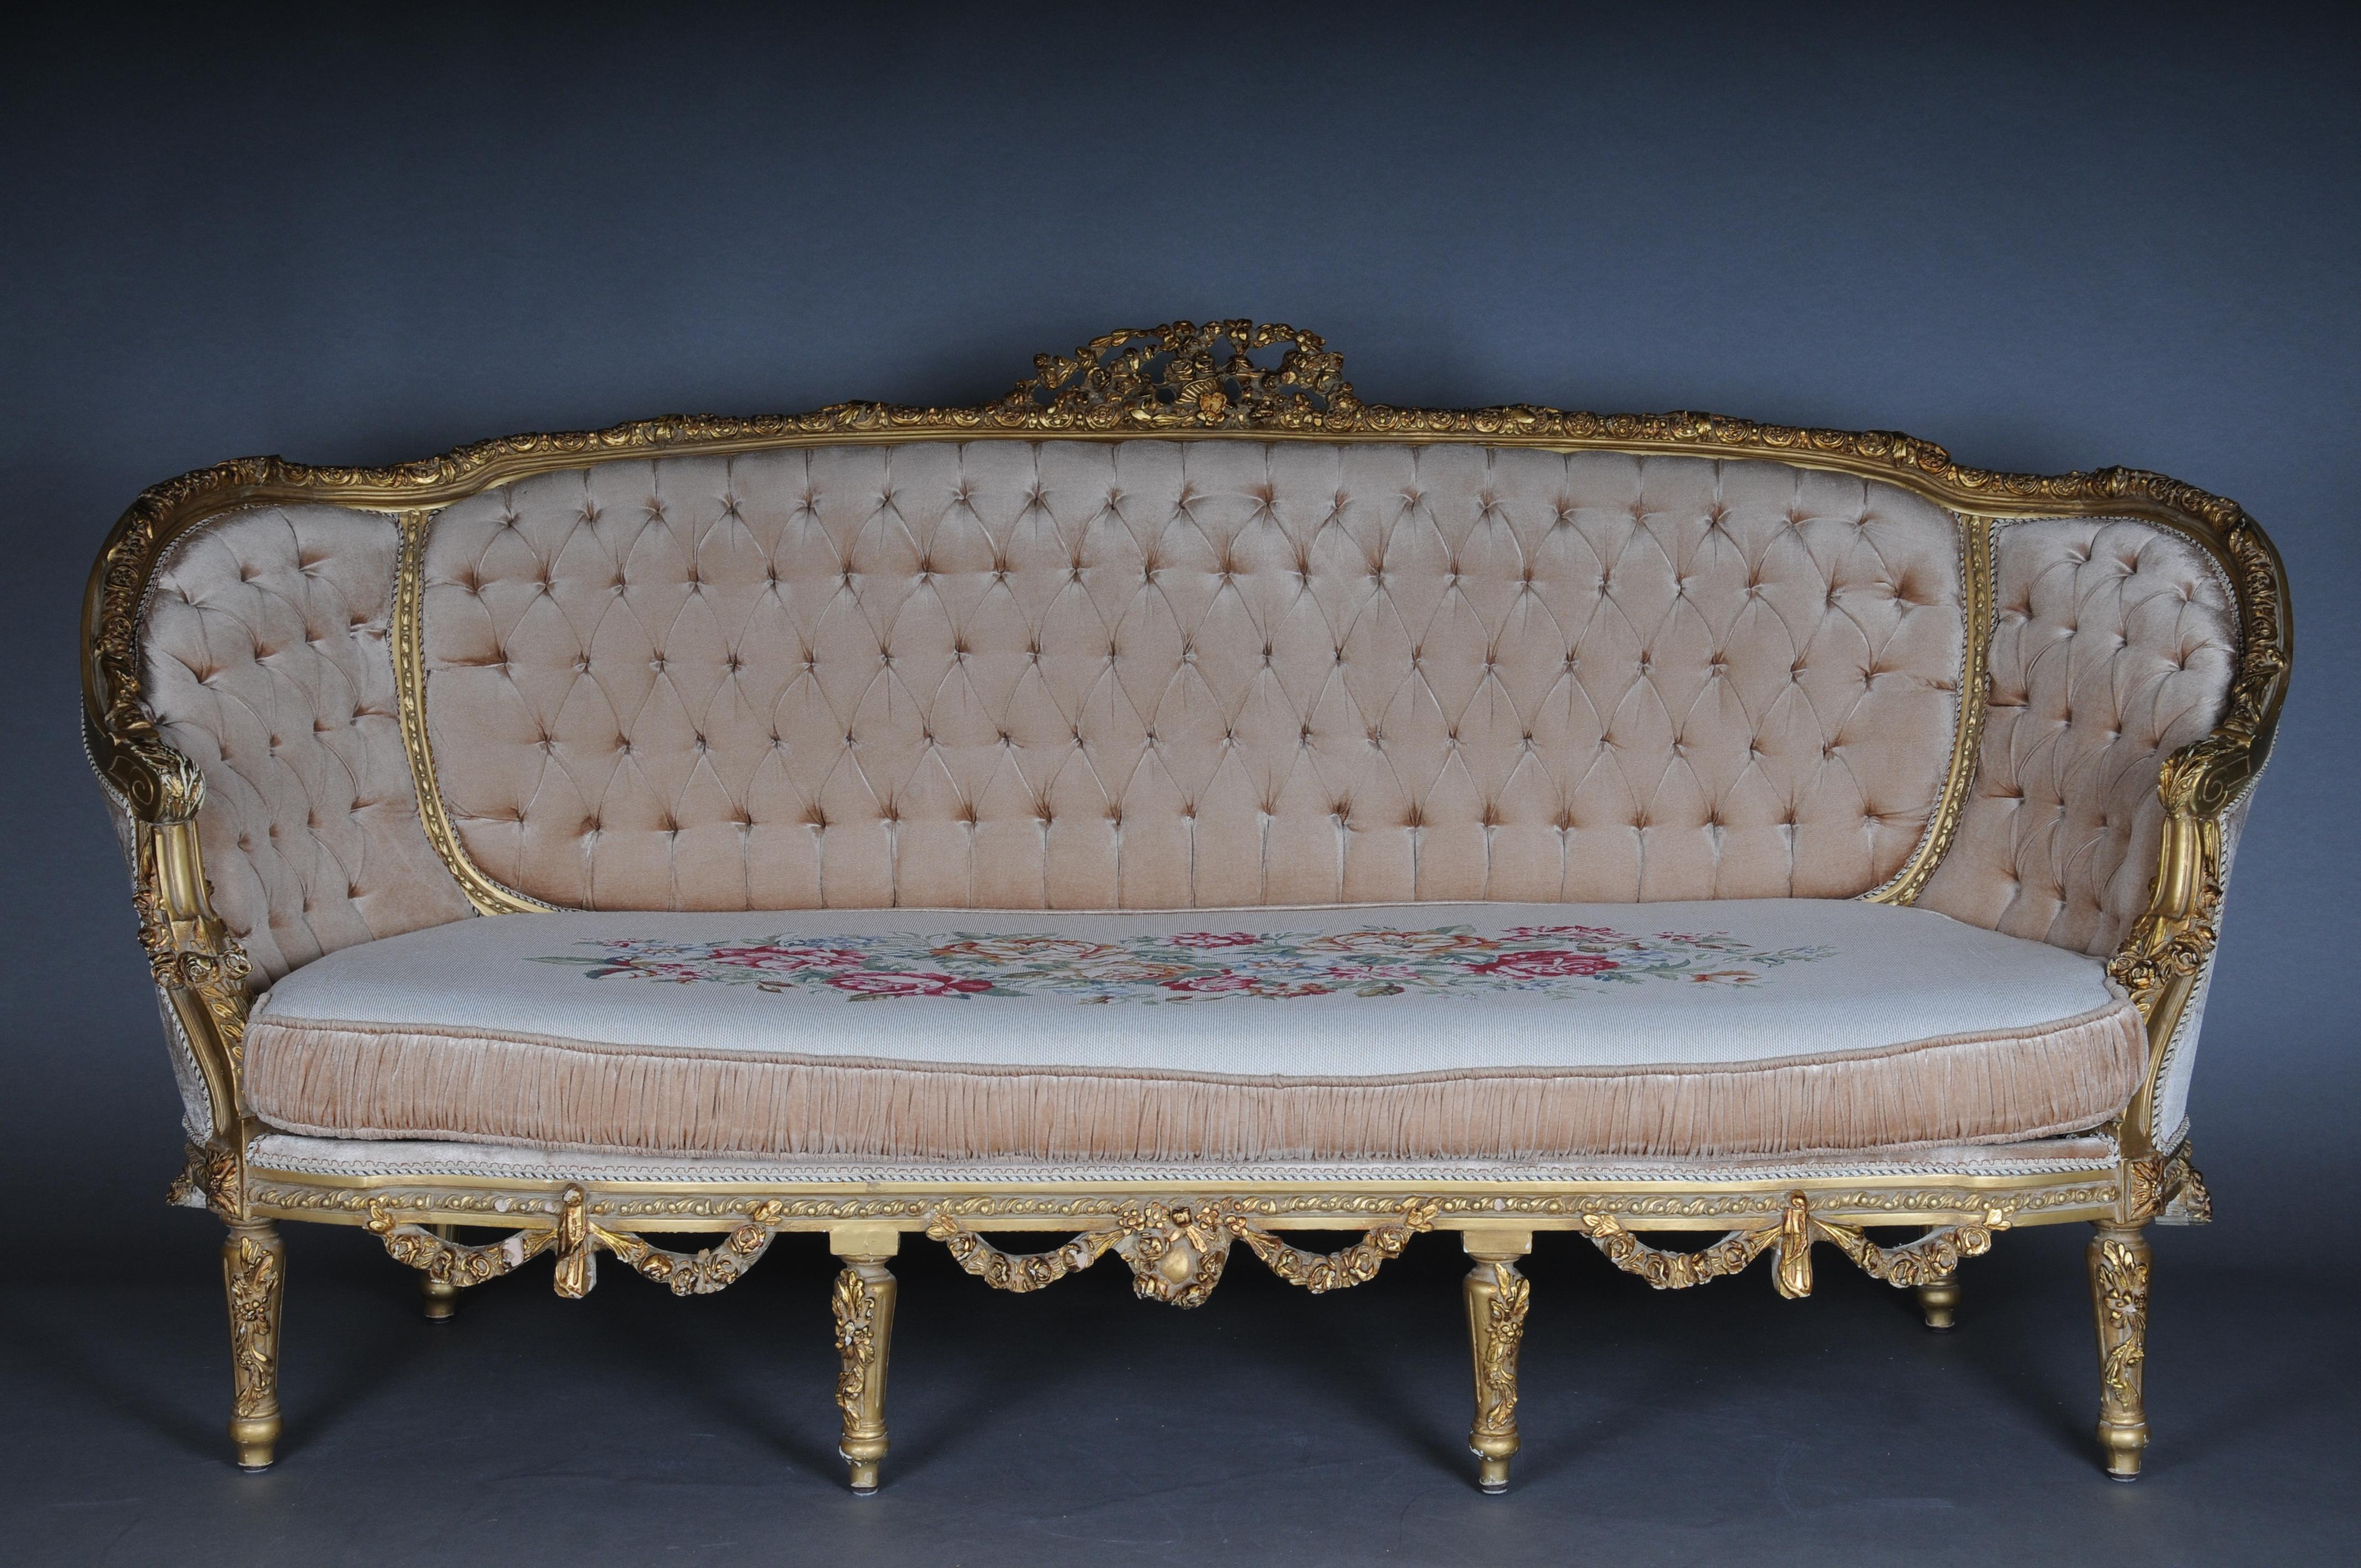 French salon seating Group Set Louis XVI Style, 20th Century gold

Solid beech wood, finely carved and set in gold. Slightly cambered and finely carved frame on curved legs. Curved armrests. Flanked by leaf rosettes in relief. Shield-shaped